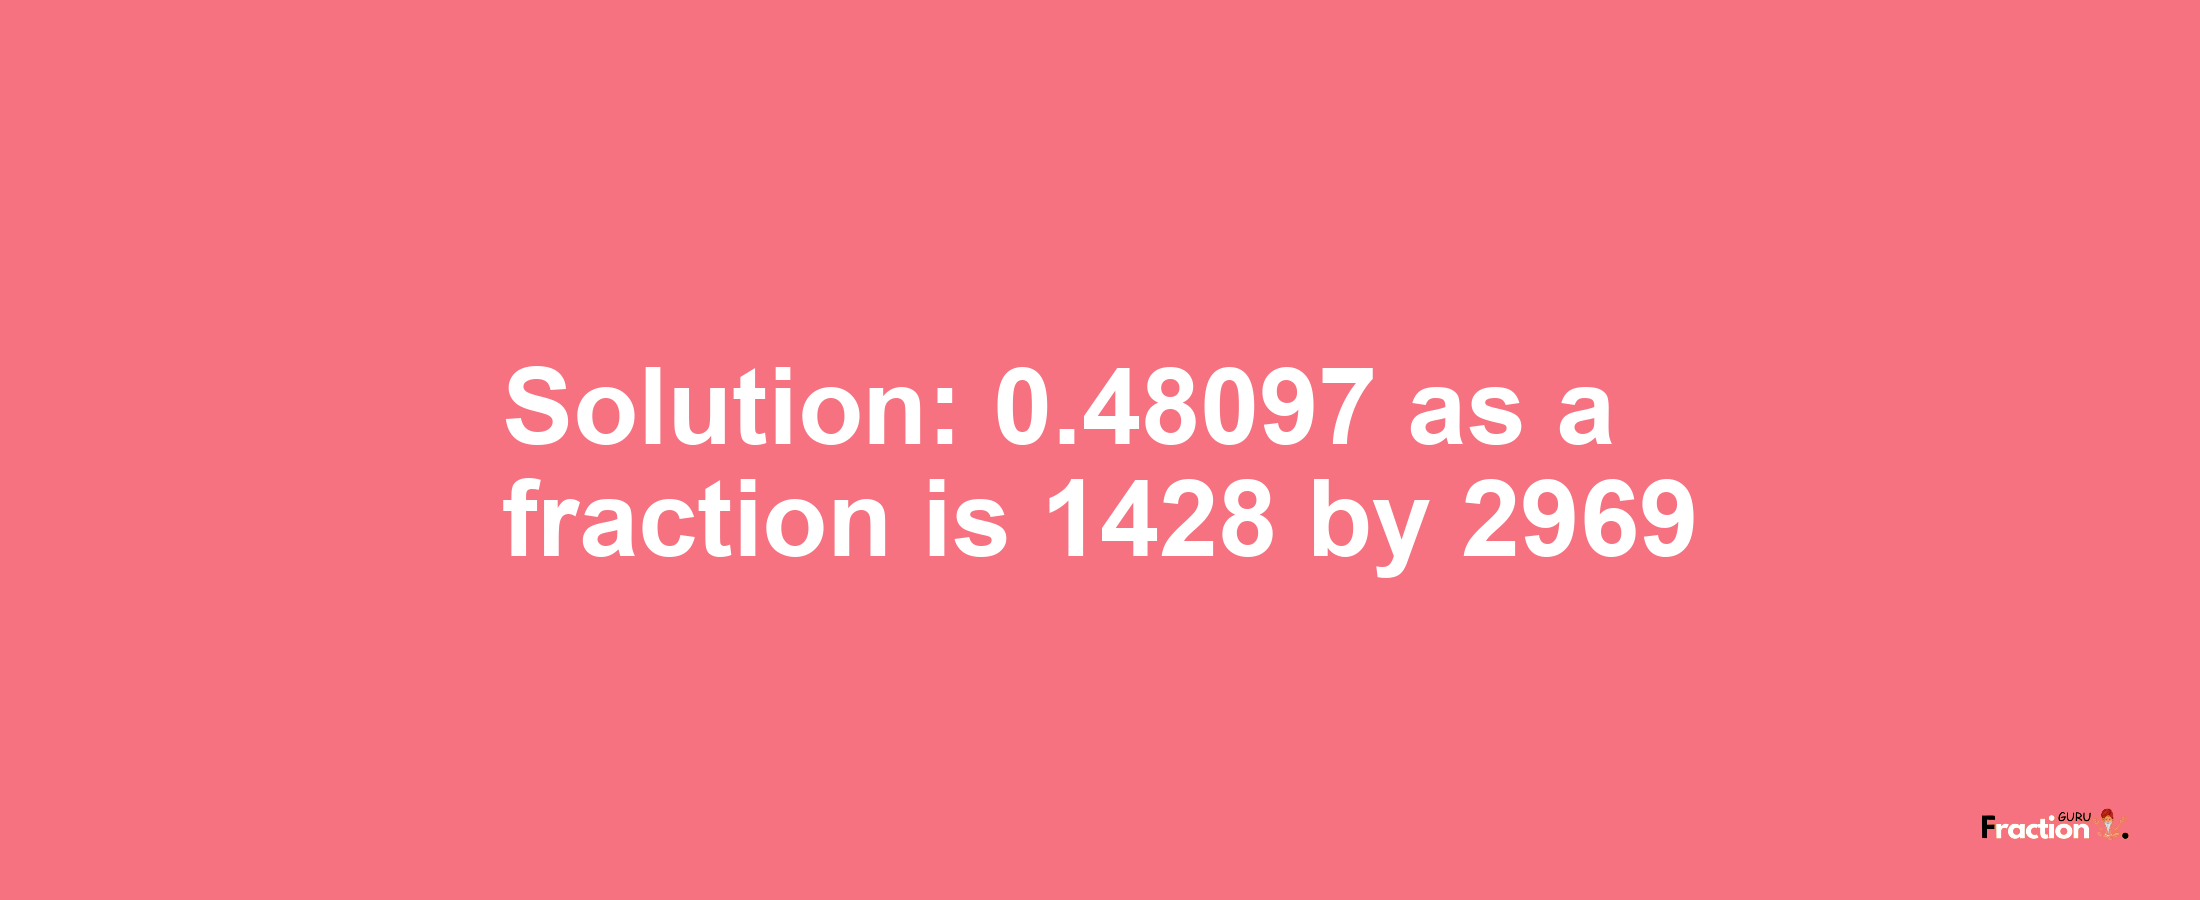 Solution:0.48097 as a fraction is 1428/2969